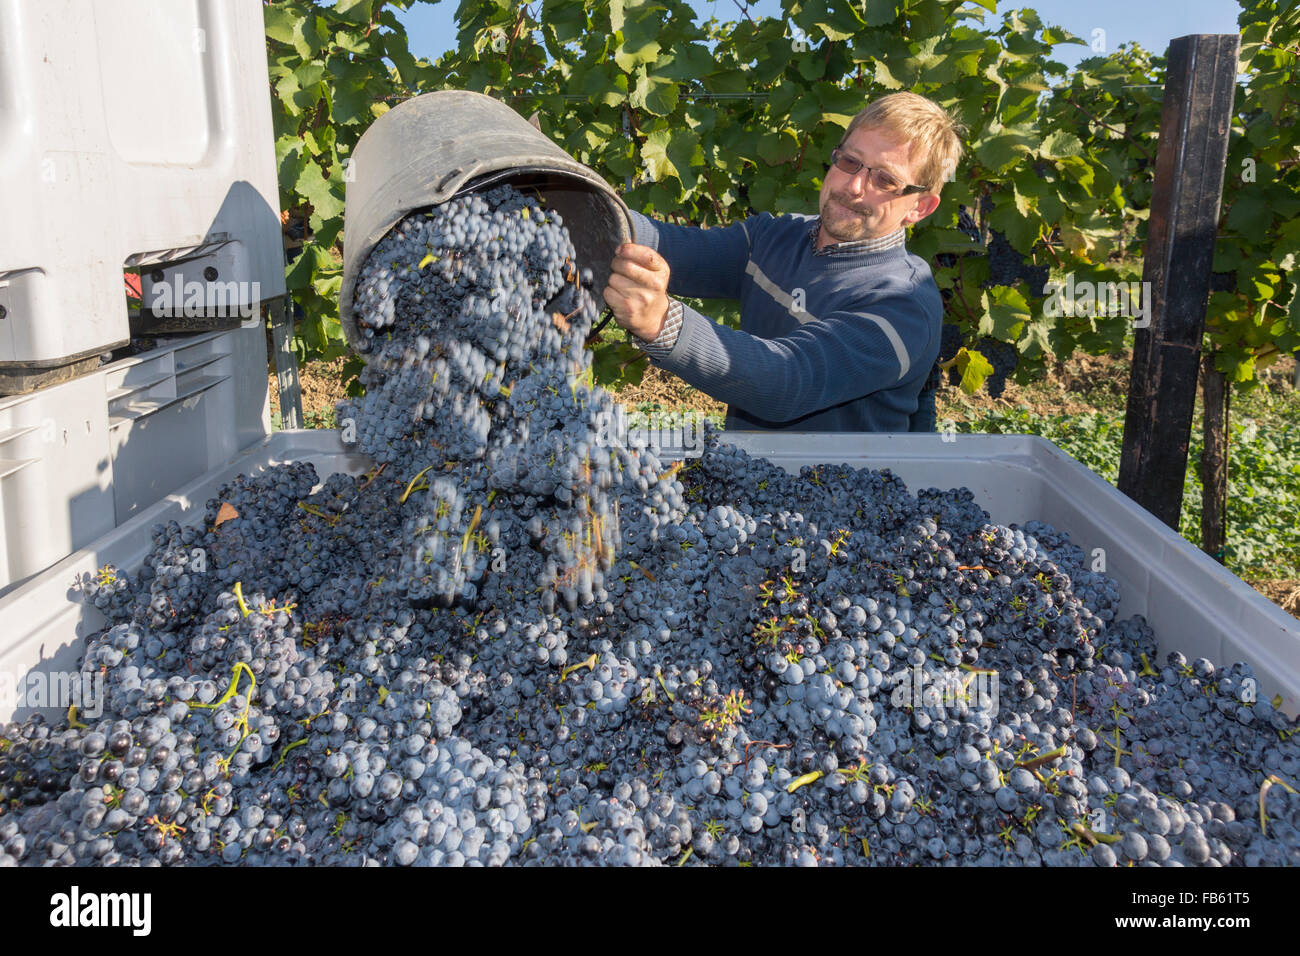 A vintner filling a container with grapes in the Kamptal / Langenlois area famous for wine making, Lower Austria, Austria Stock Photo